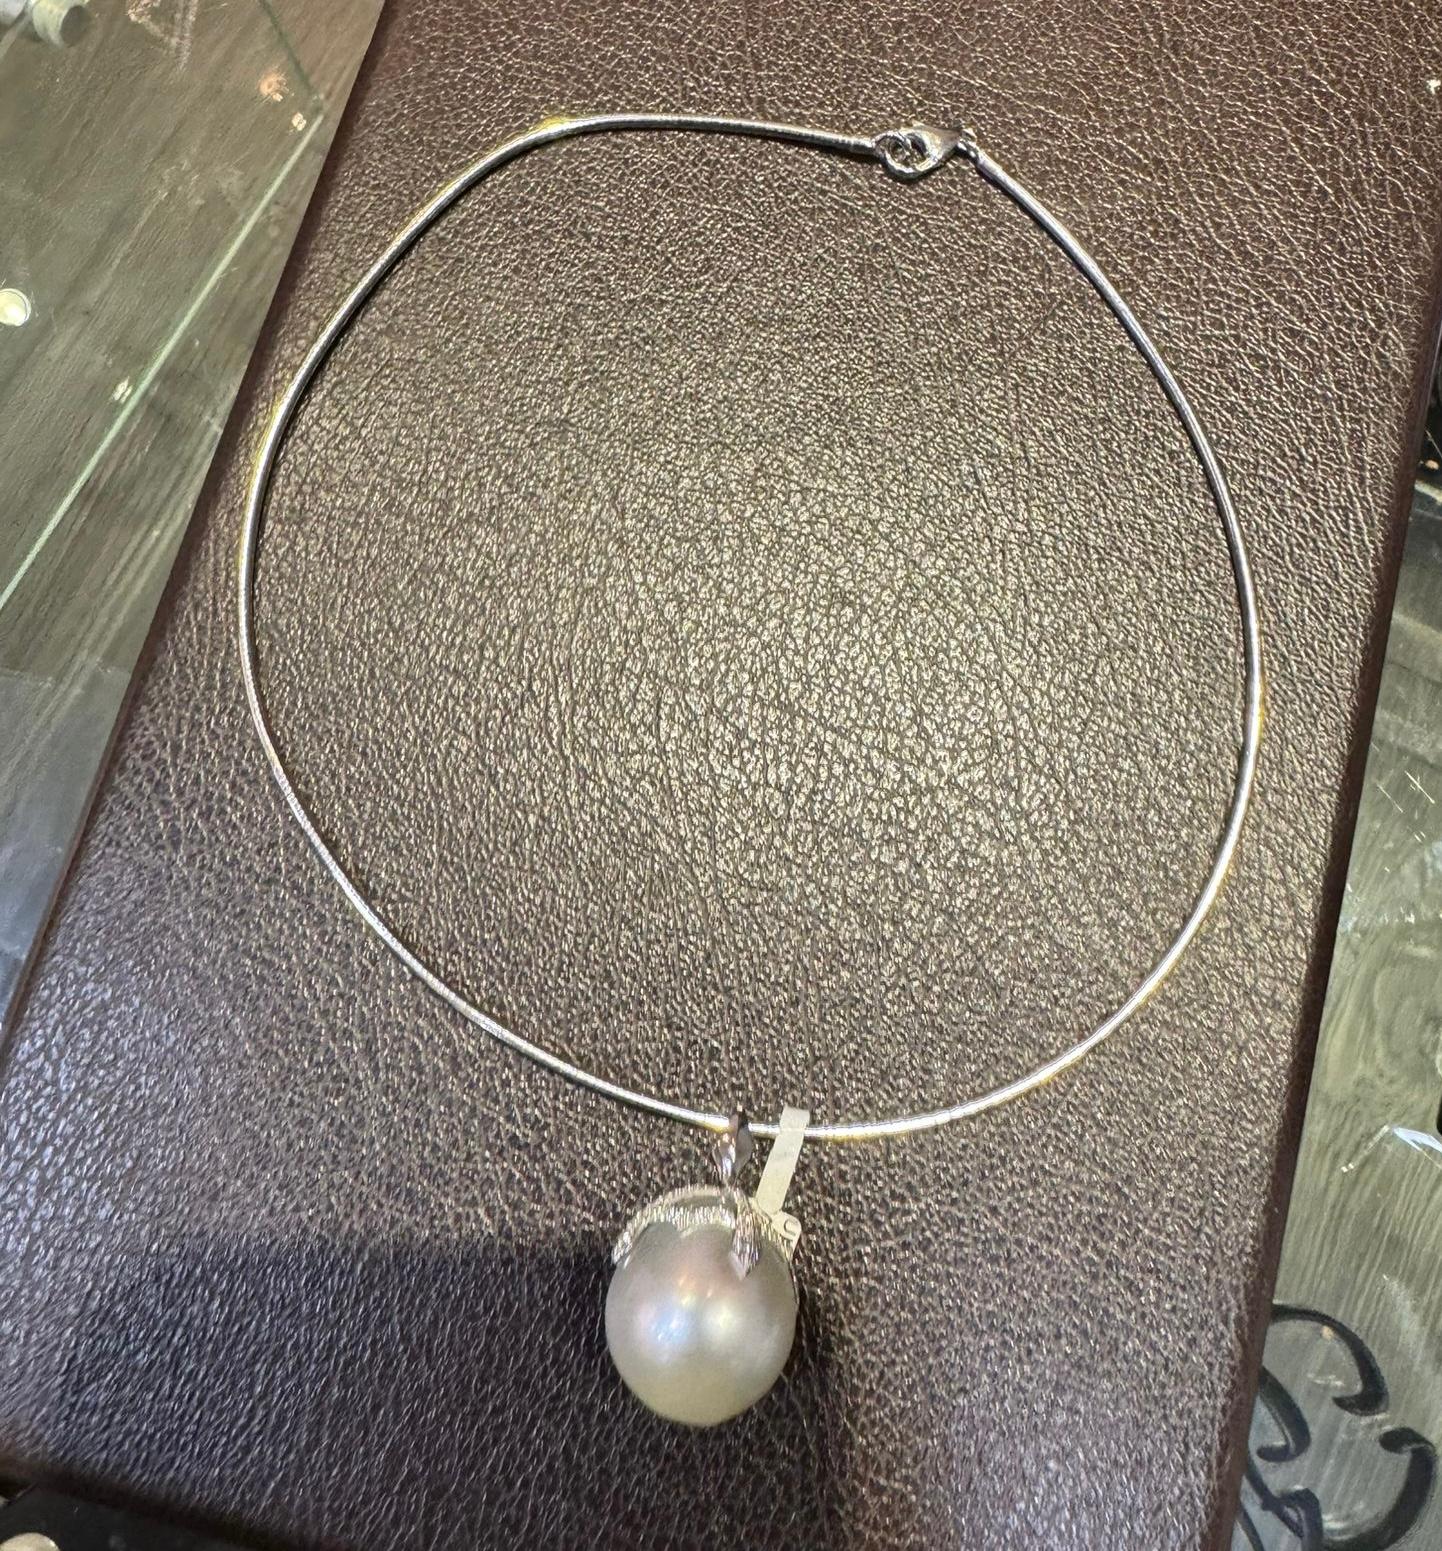 Big CULTURED PEARL AND DIAMOND PENDANT/NECKLACE
Cultured pearl
Brilliant-cut diamonds, approx. 0.75ct total
French assay marks
Lengths: pendant 3.2cm, necklace 42.4cm
Weight approx. 31.0g
Clasp marked 750.

CULTURED PEARL
Measuring very approx. 20.5